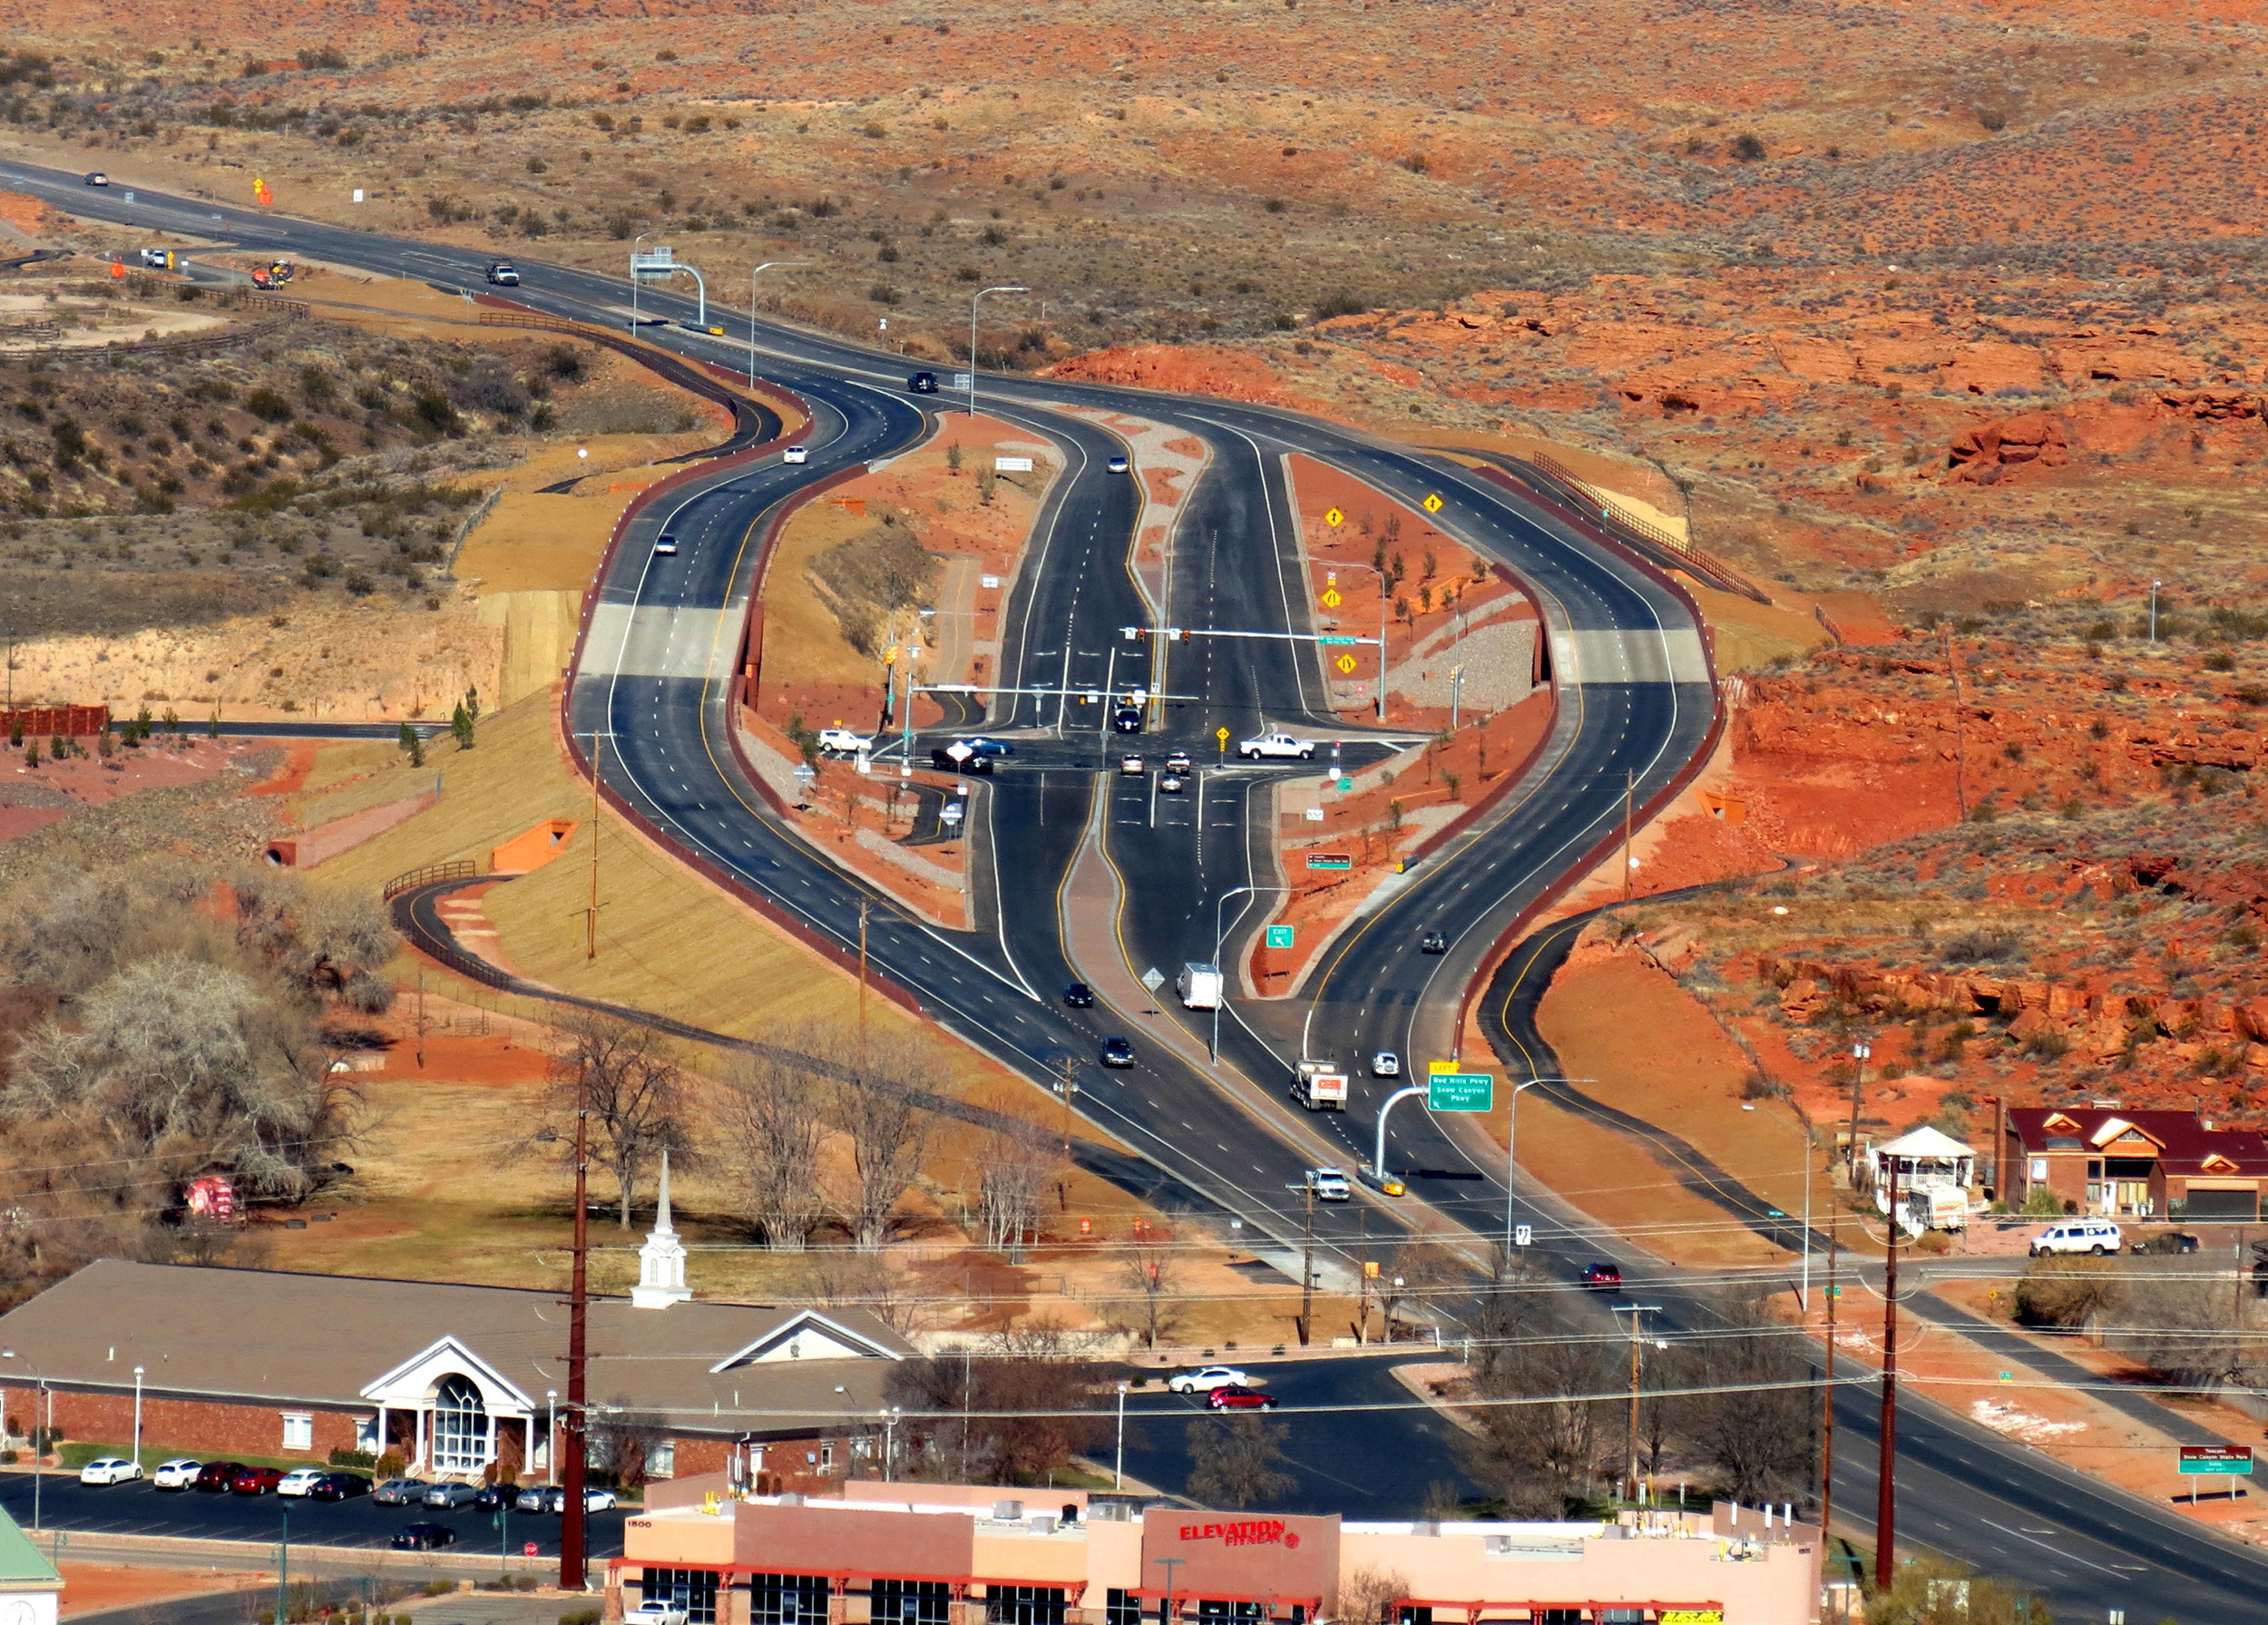 The improved functionality of the Bluff Street and Red Hills Parkway interchange accounts for future growth in the surrounding area.